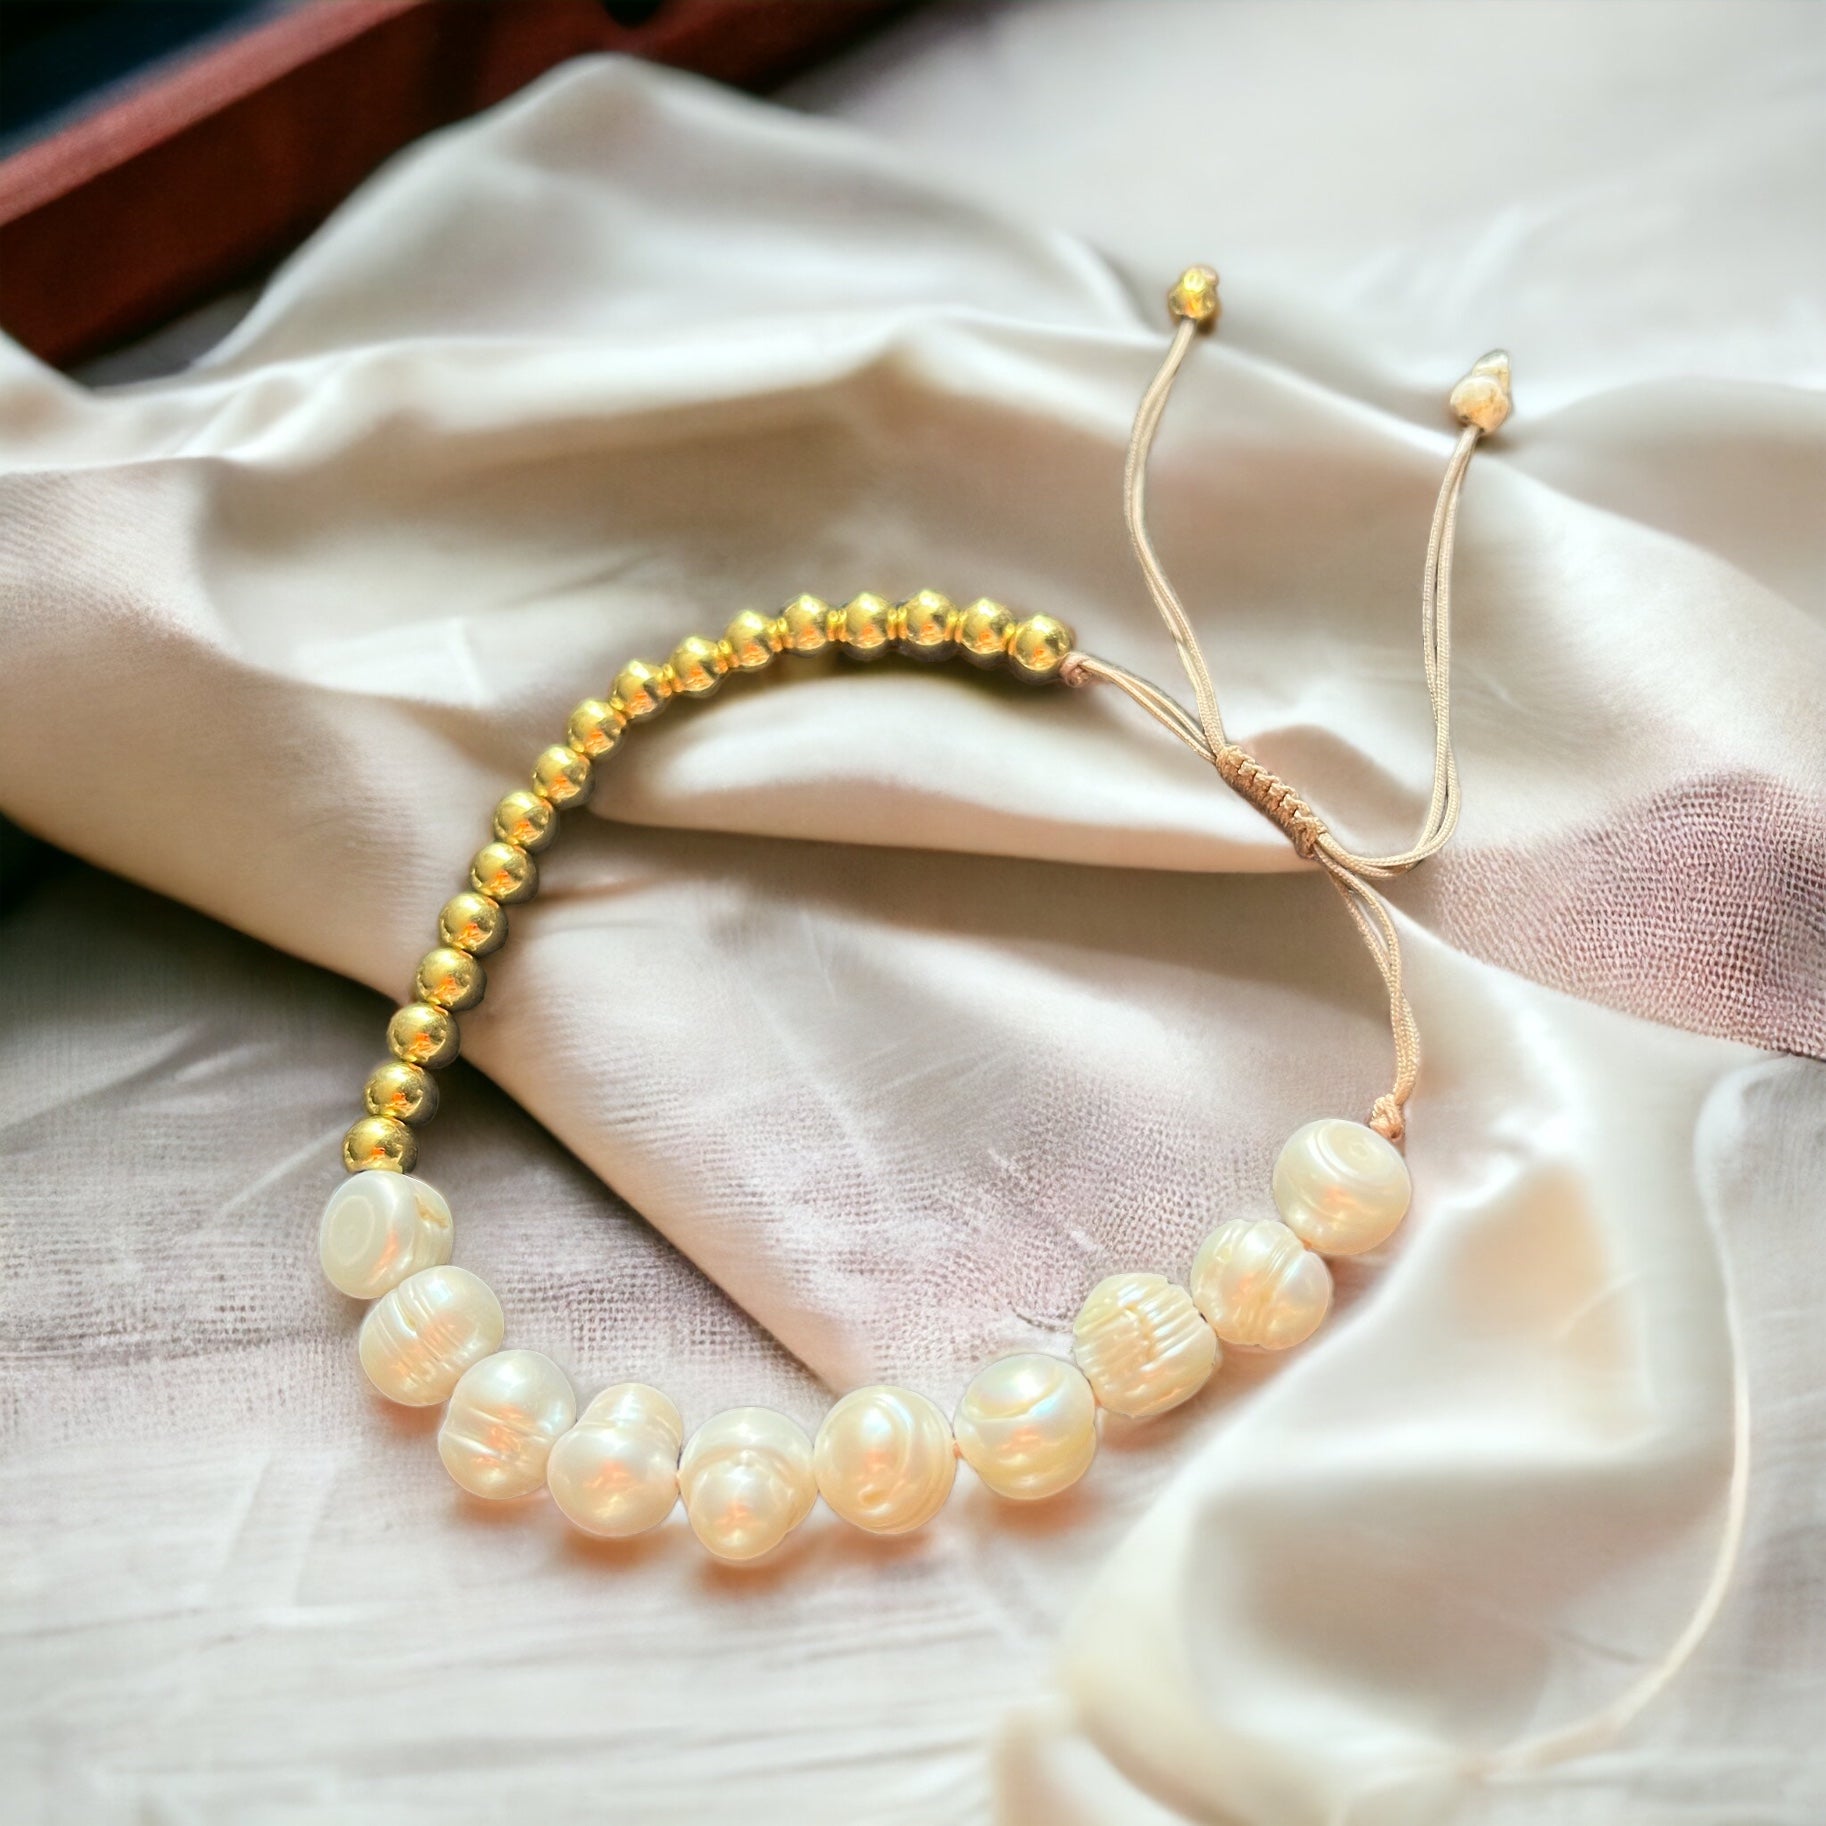 Gold and pearl beaded bracelet